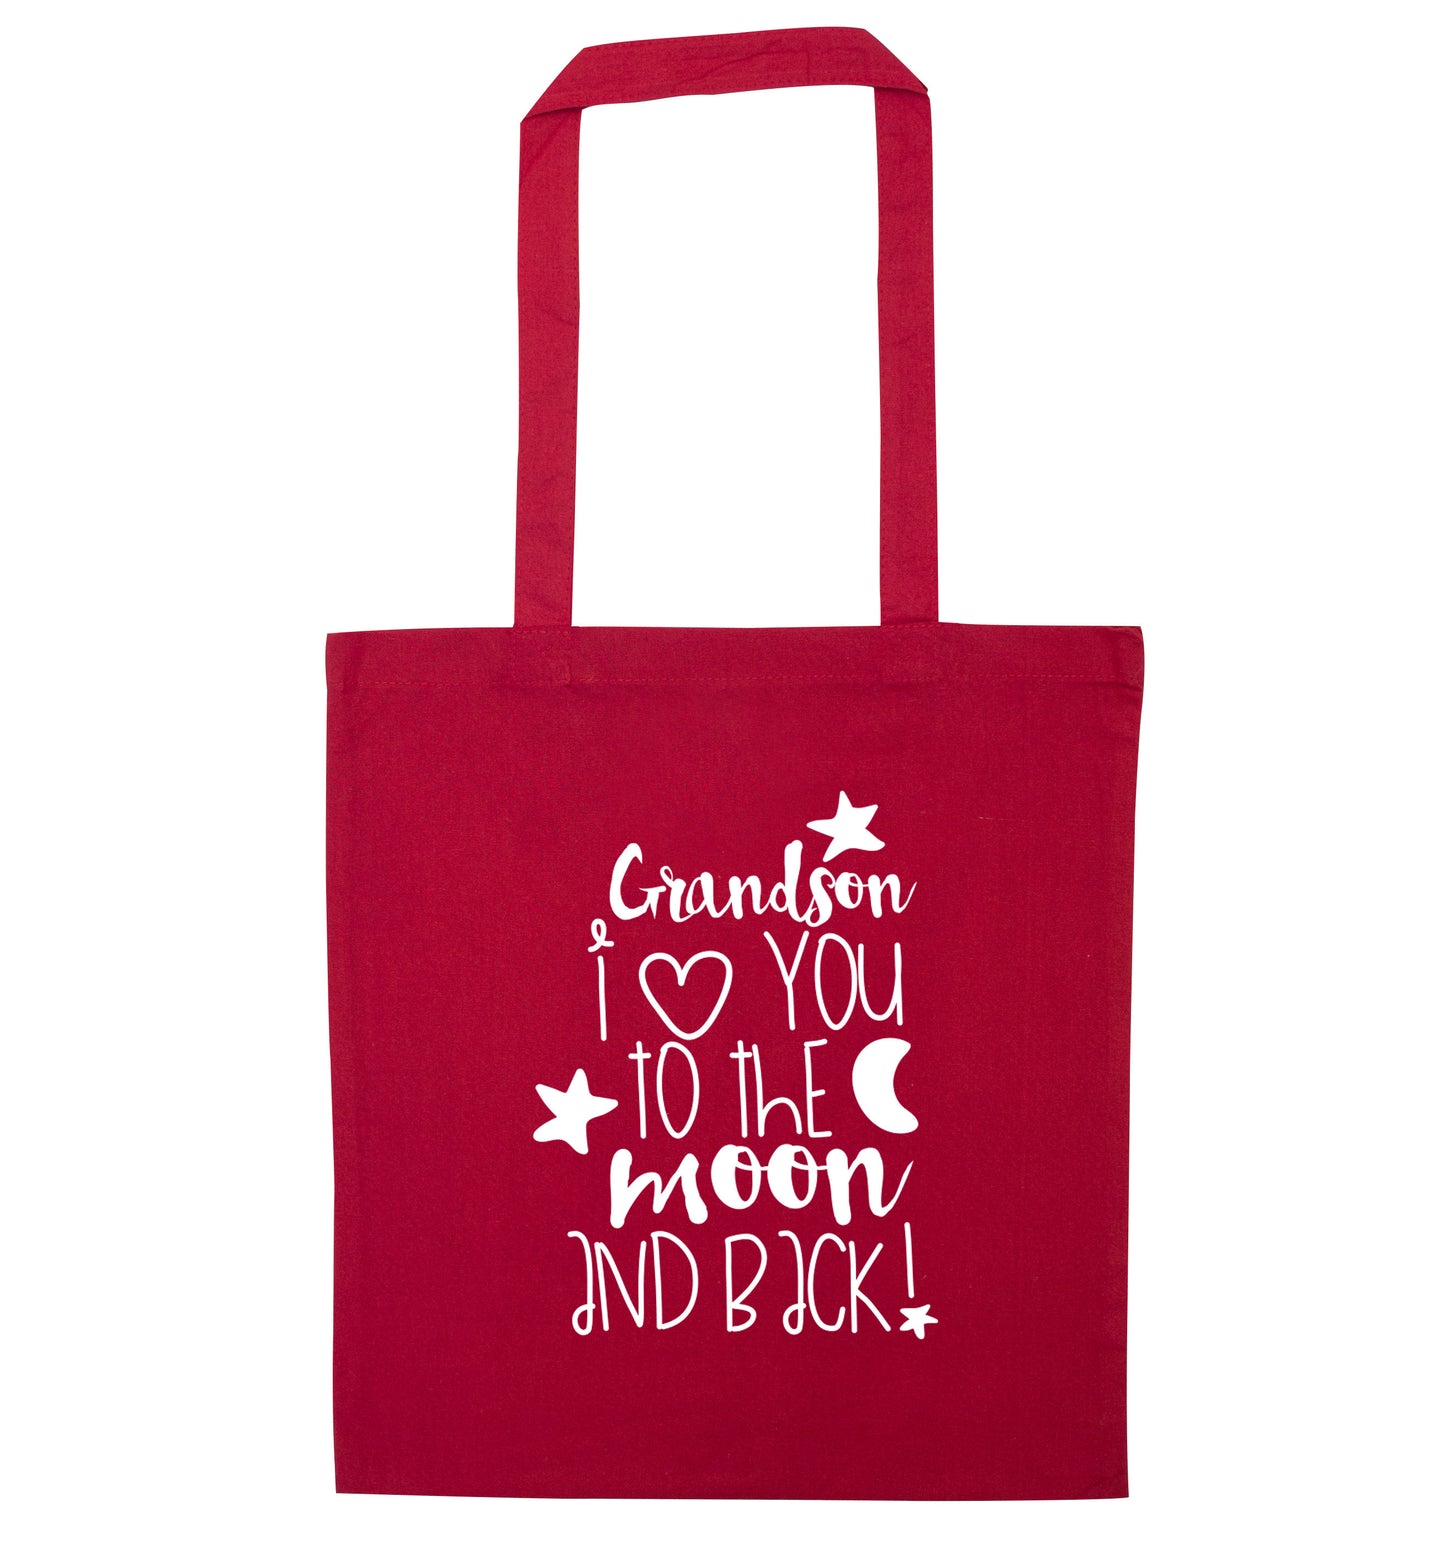 Grandson I love you to the moon and back red tote bag